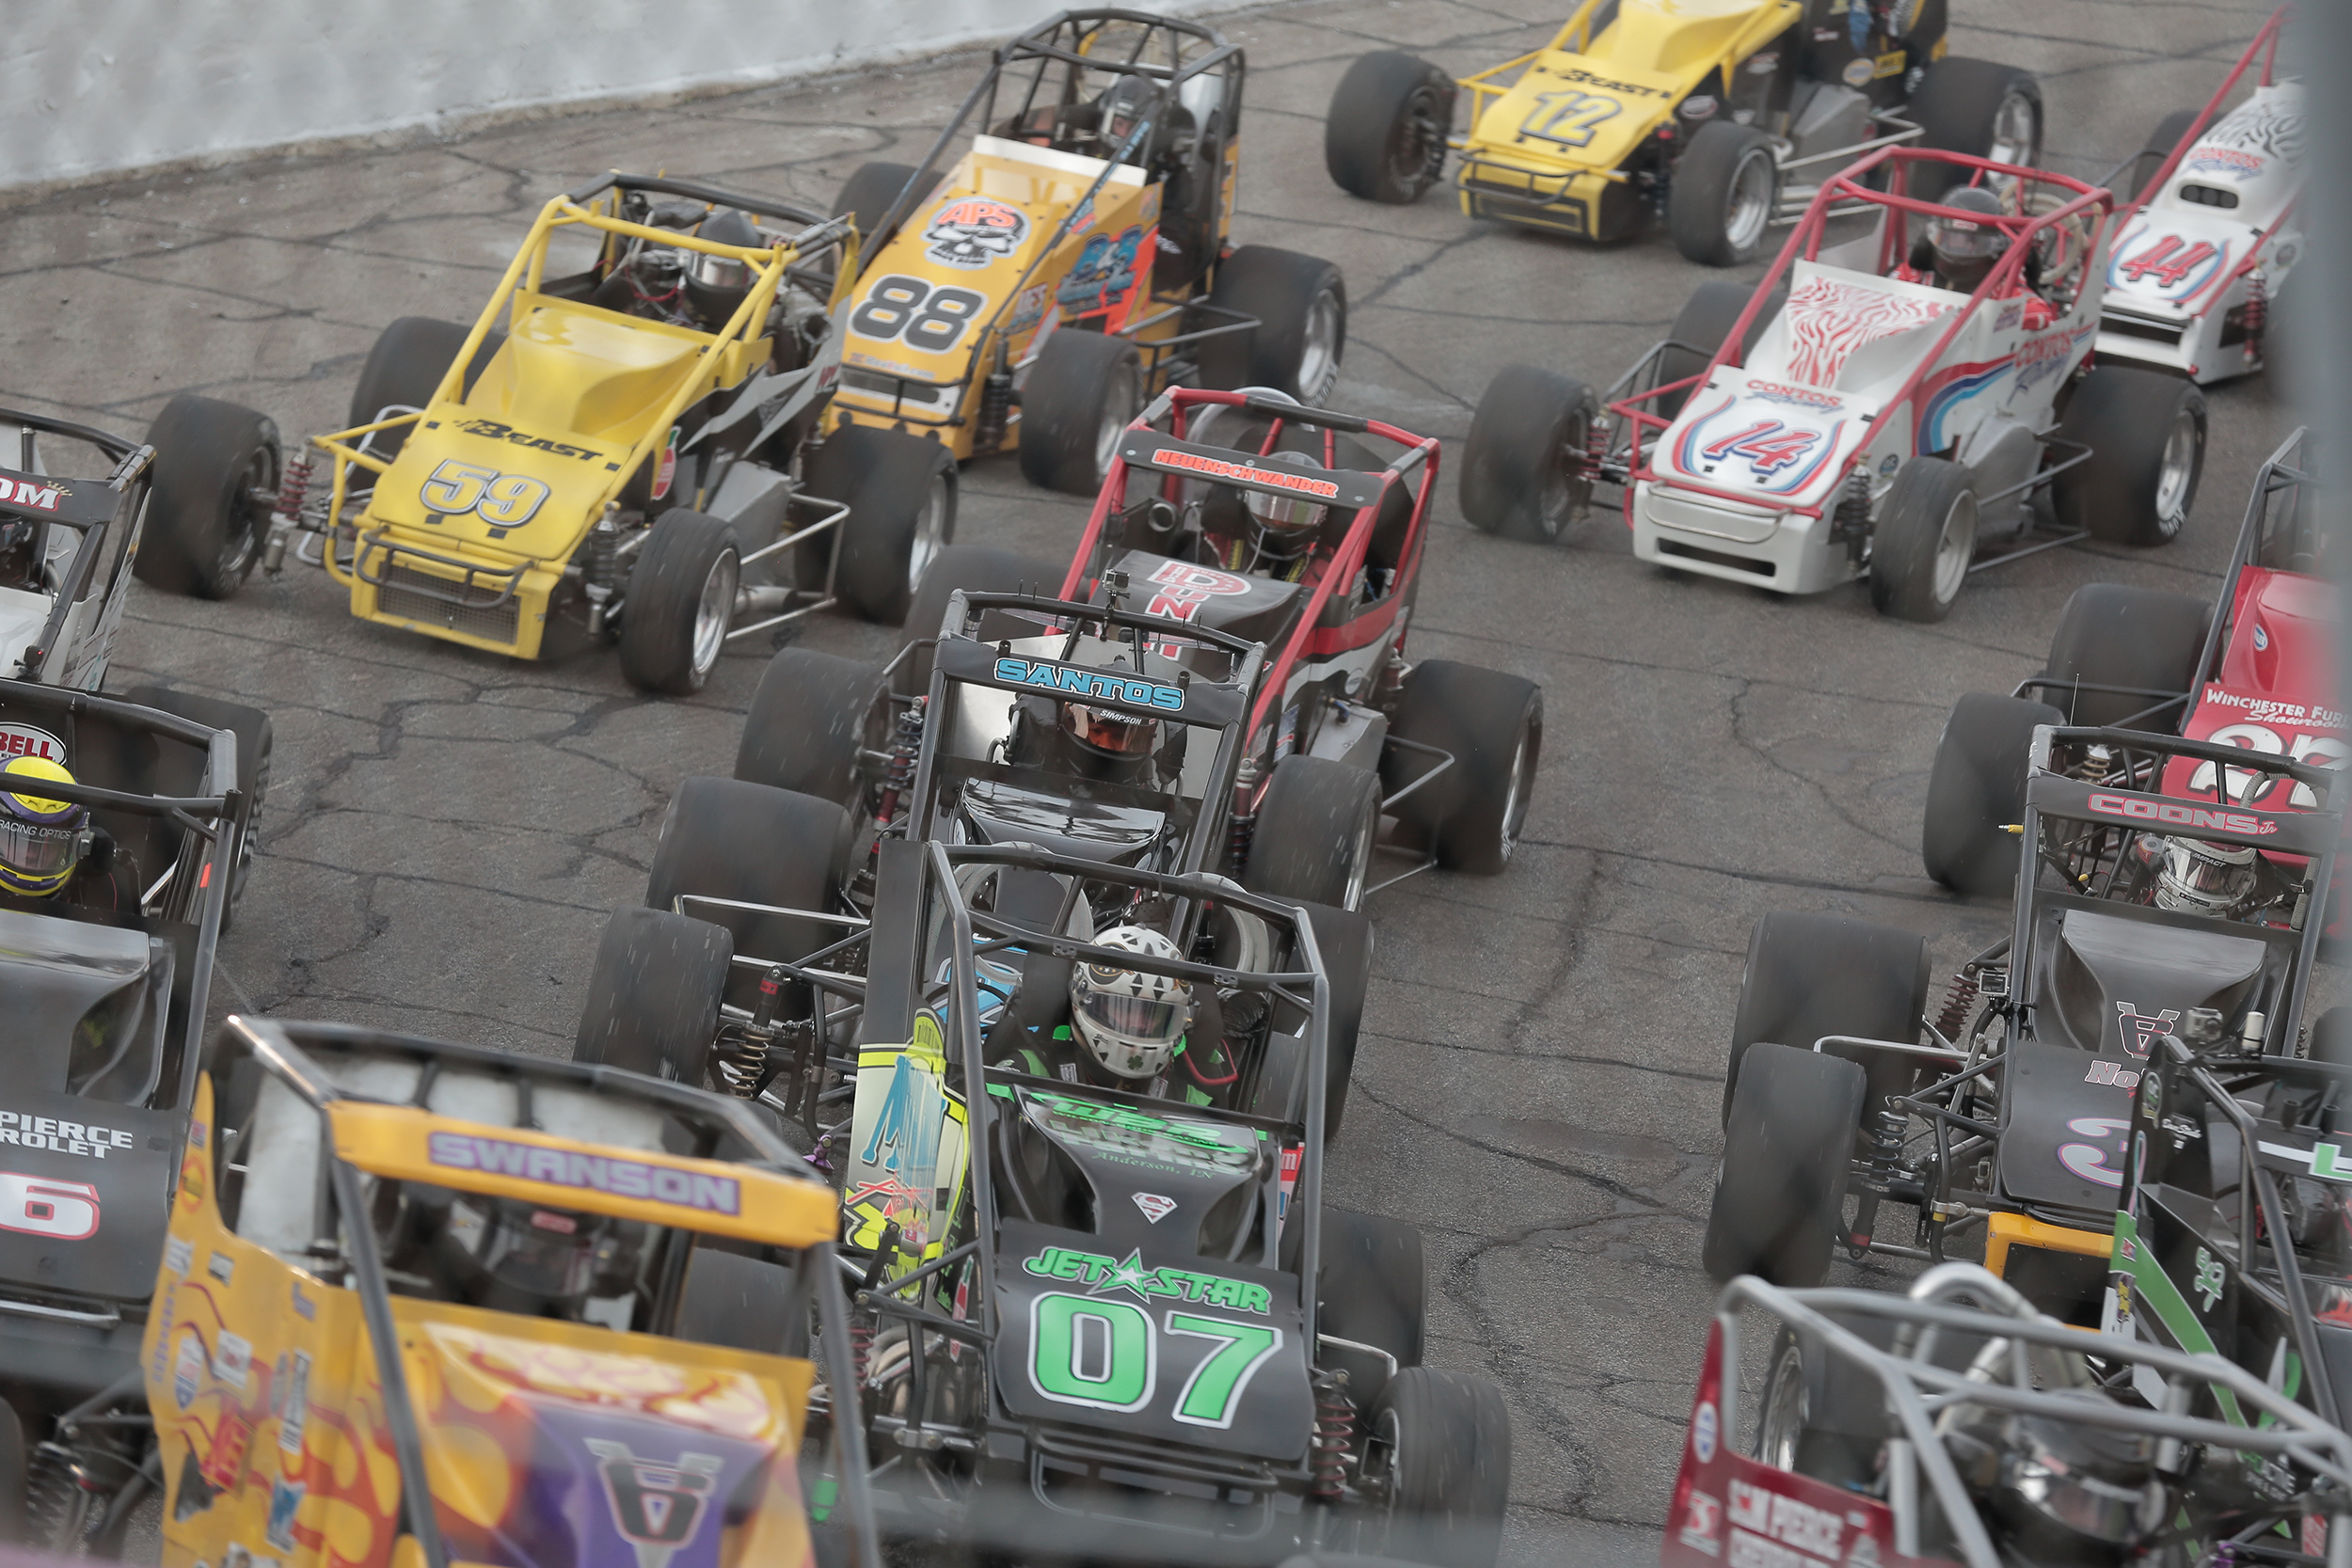 71st Annual Pay Less Little 500 presented by UAW - Anderson, Indiana Speedway